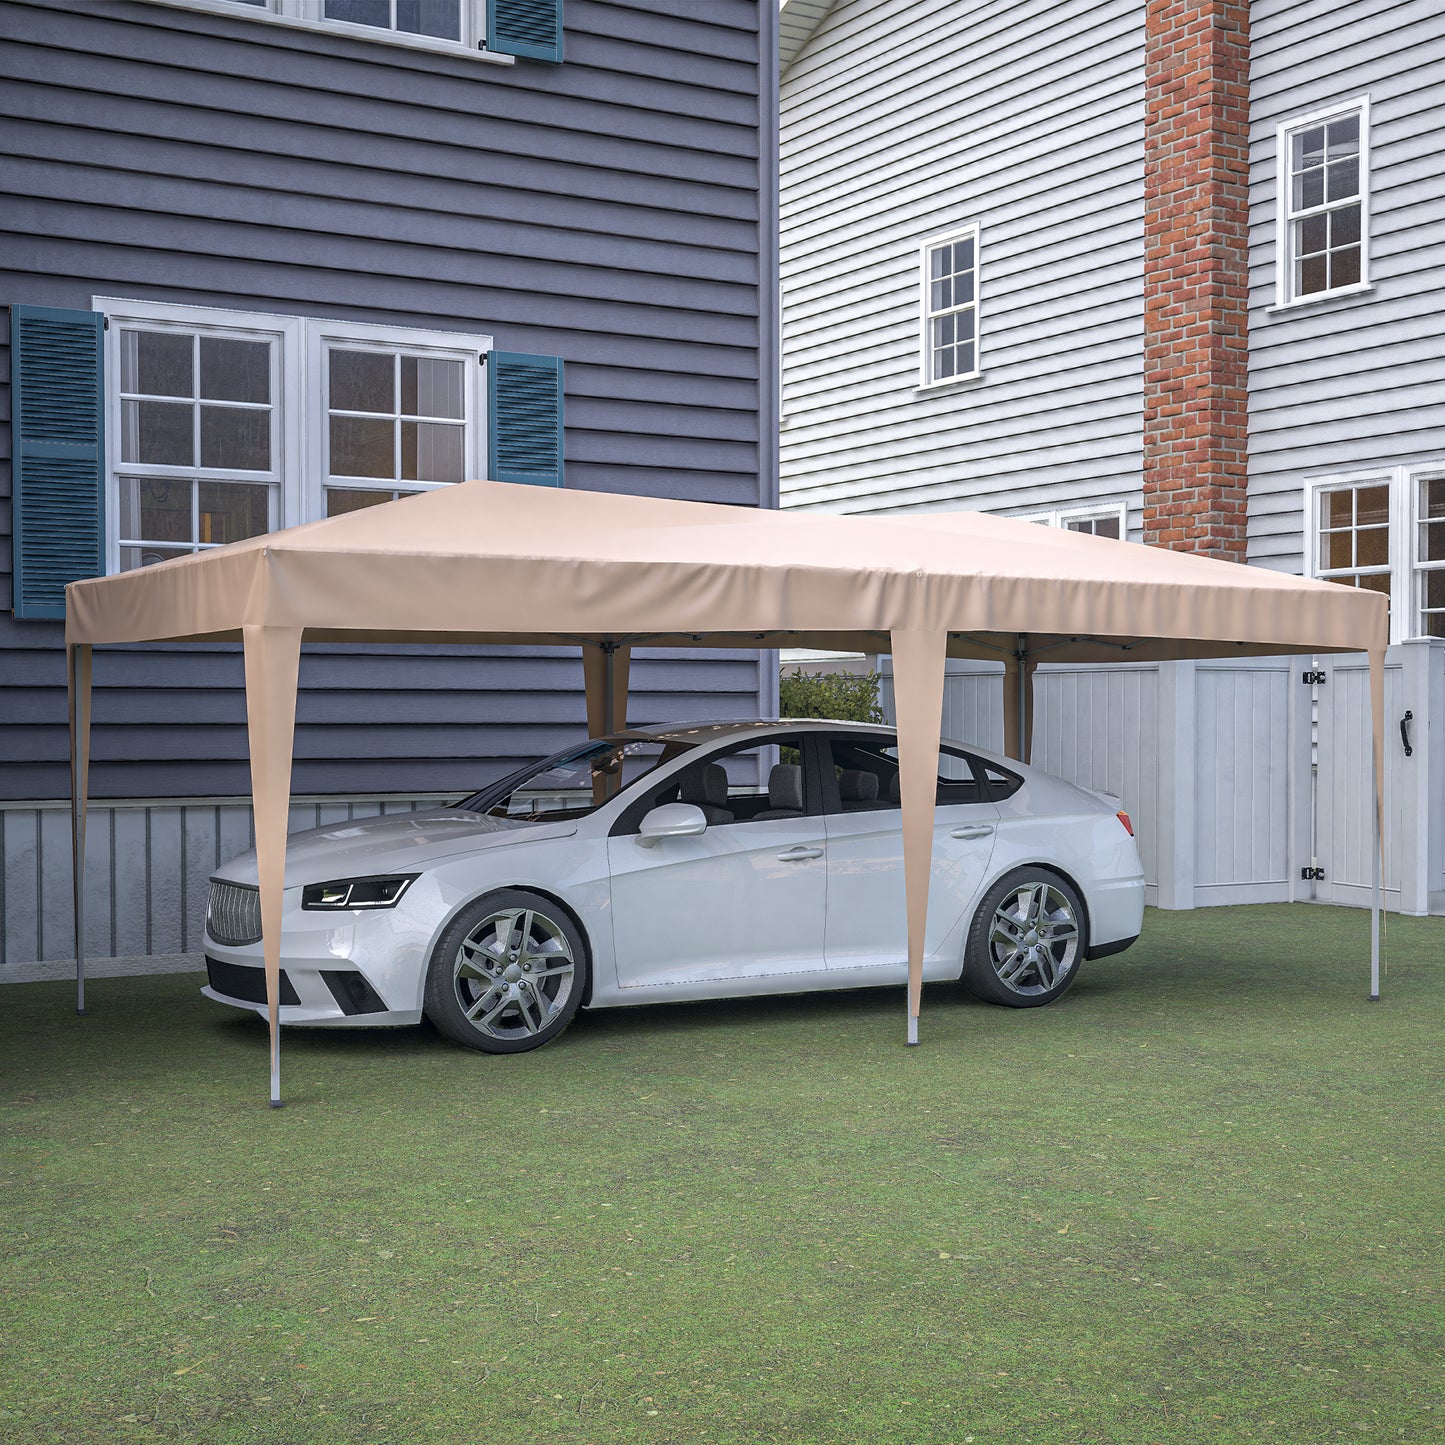 10'x20' EZ Pop Up Canopy Outdoor Portable Party Folding Tent with 6 Removable Sidewalls + Carry Bag + 6pcs Weight Bag Beige